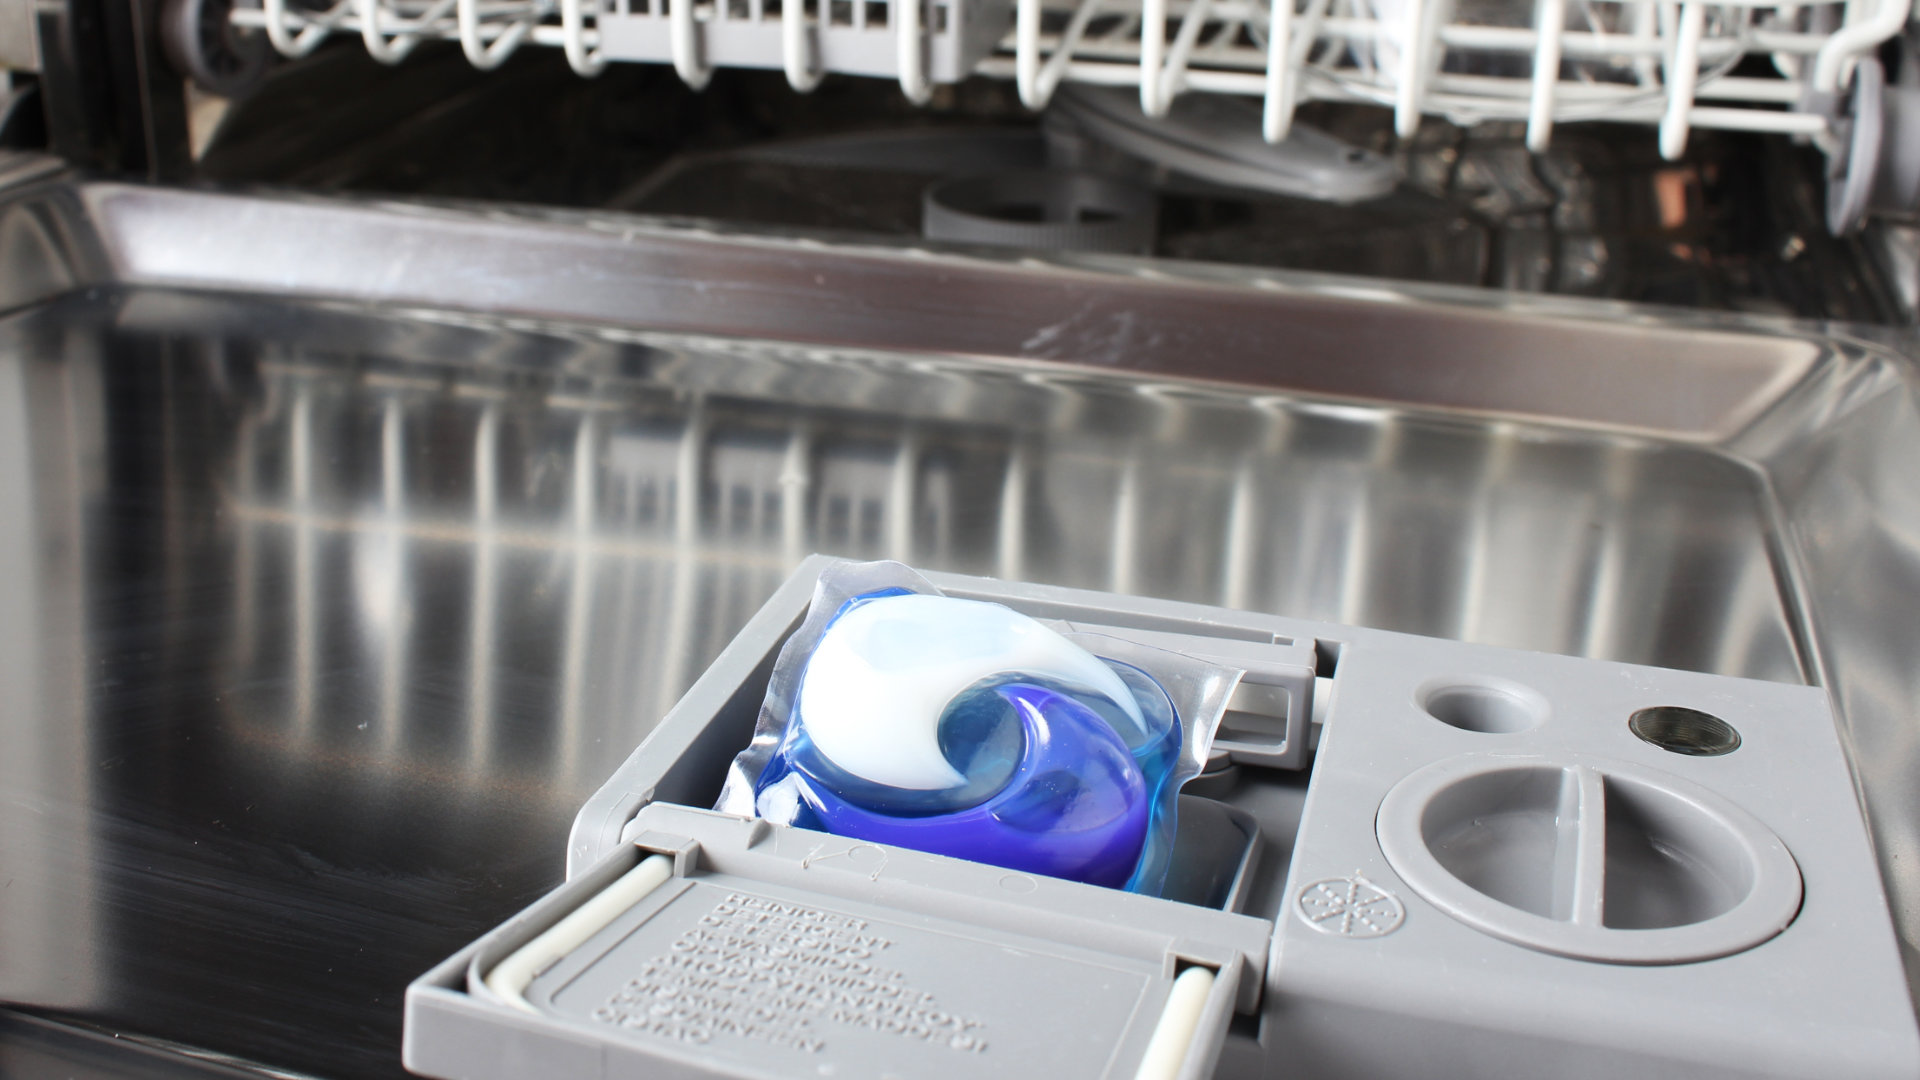 Featured image for “Dishwasher Pod Not Dissolving? Here’s What To Do”